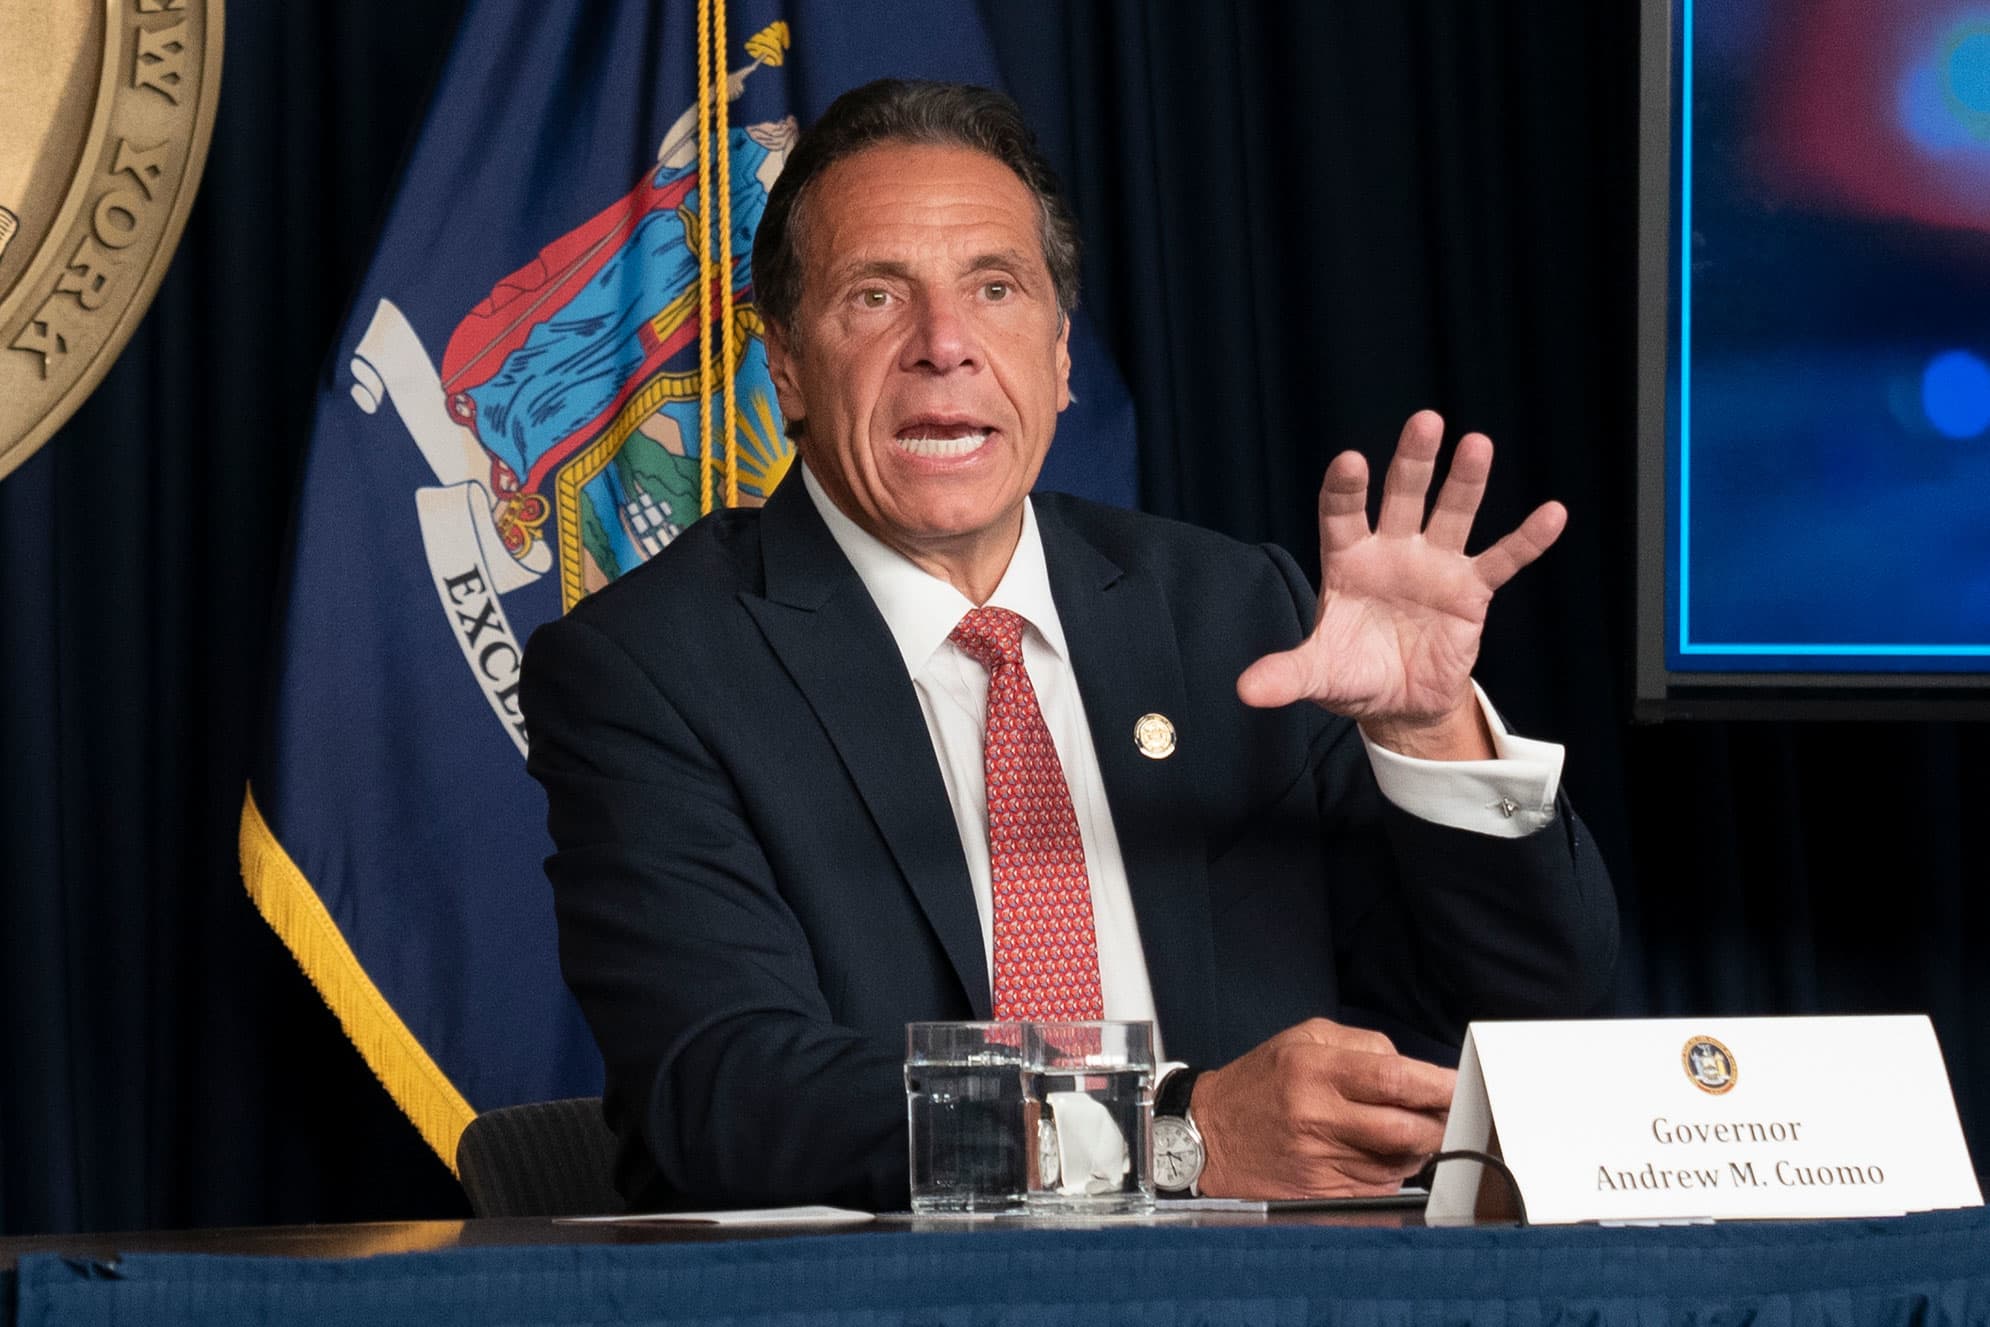 Andrew Cuomo court date delayed after prosecutor warns of 'defective' sex crime complaint